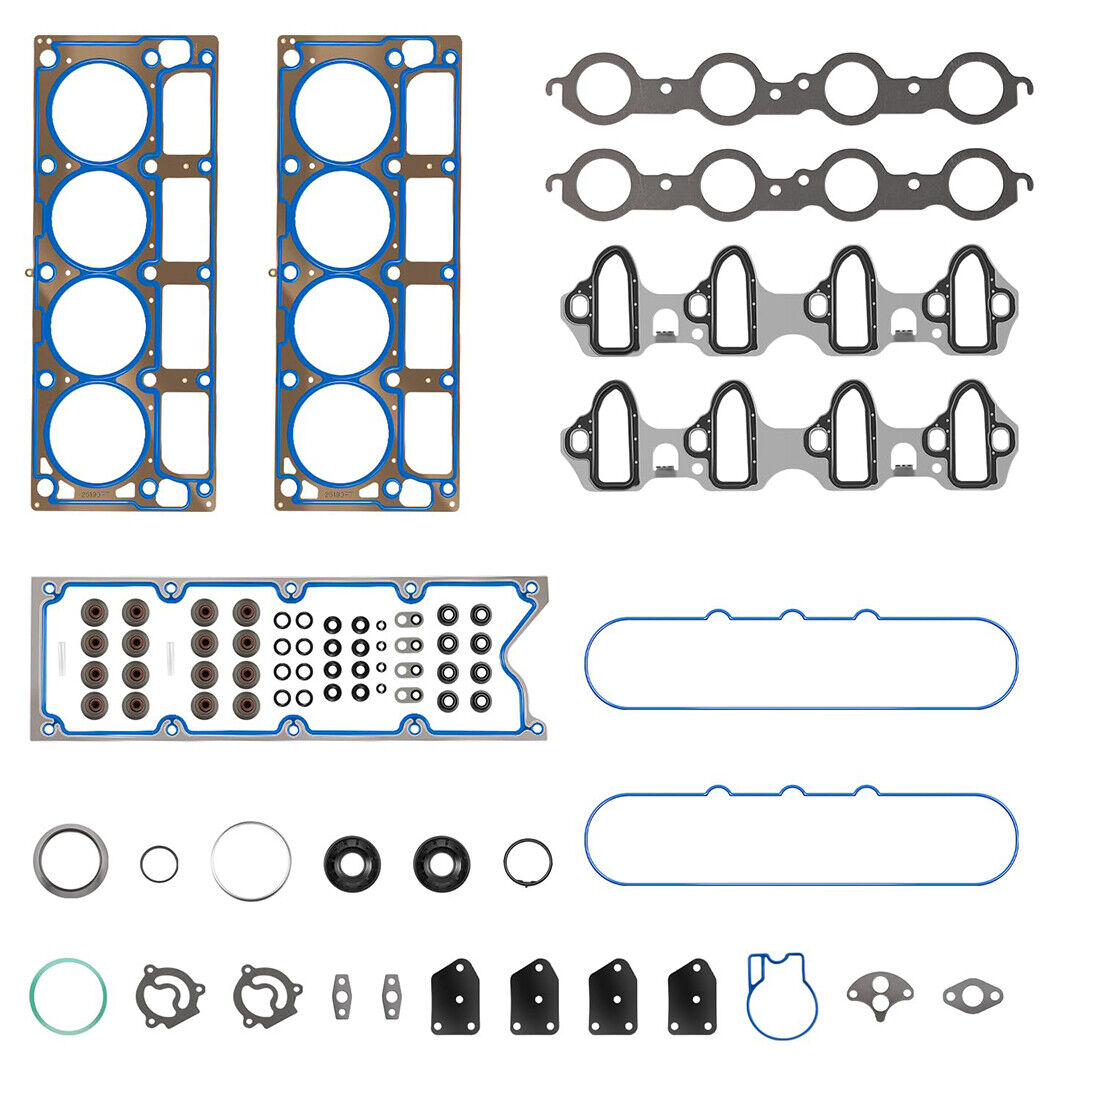 HS 26191 PT-1 Head Gasket Set for 2002-2011 Chevy Cadillac GMC Buick 4.8L 5.3L